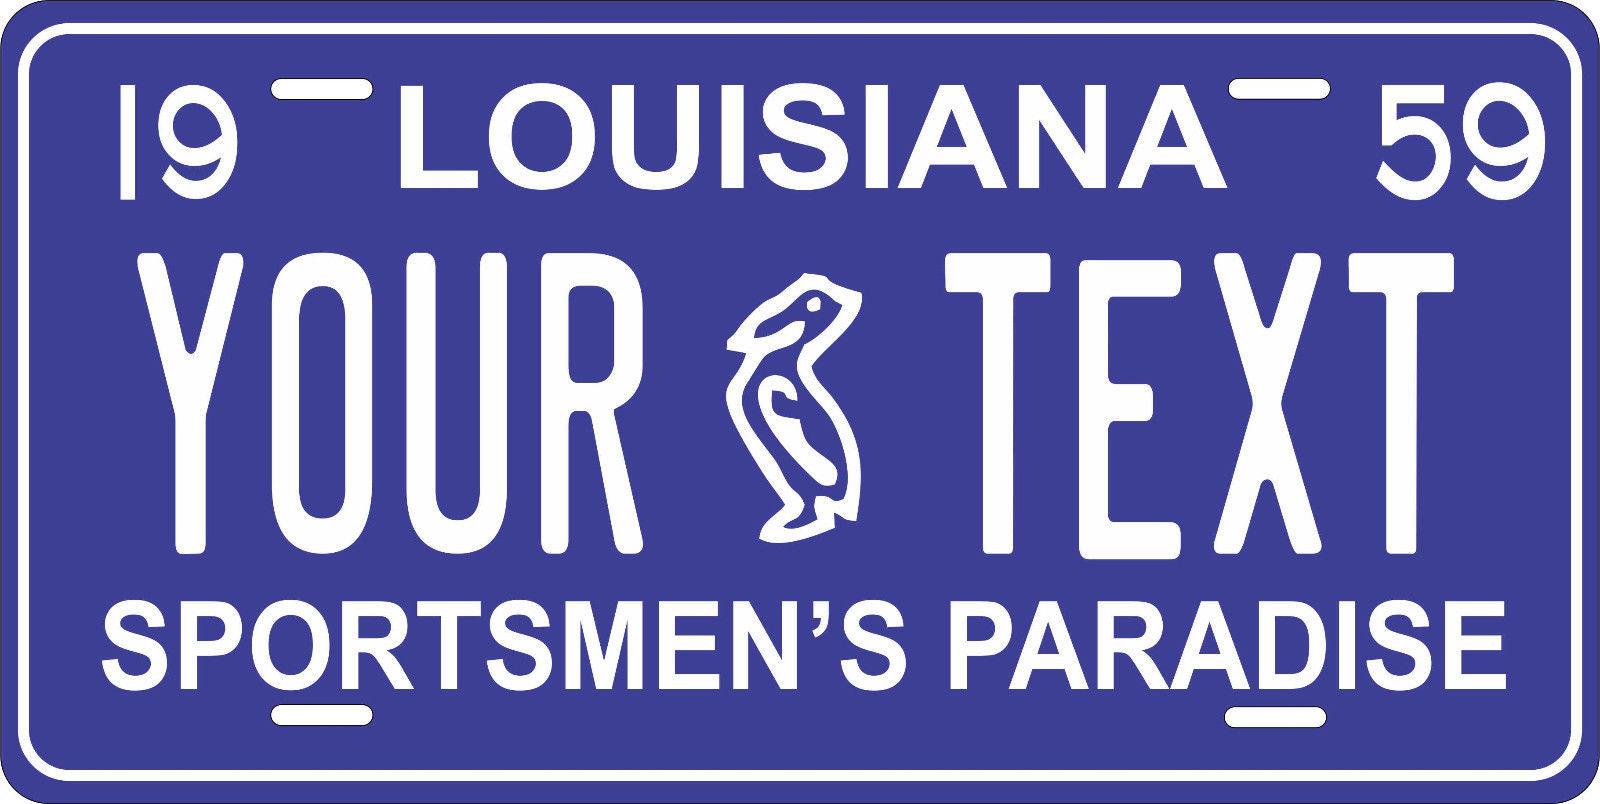 Louisiana 1959 License Plate Personalized Custom Car Bike Motorcycle Moped Tag - $10.99 - $18.22